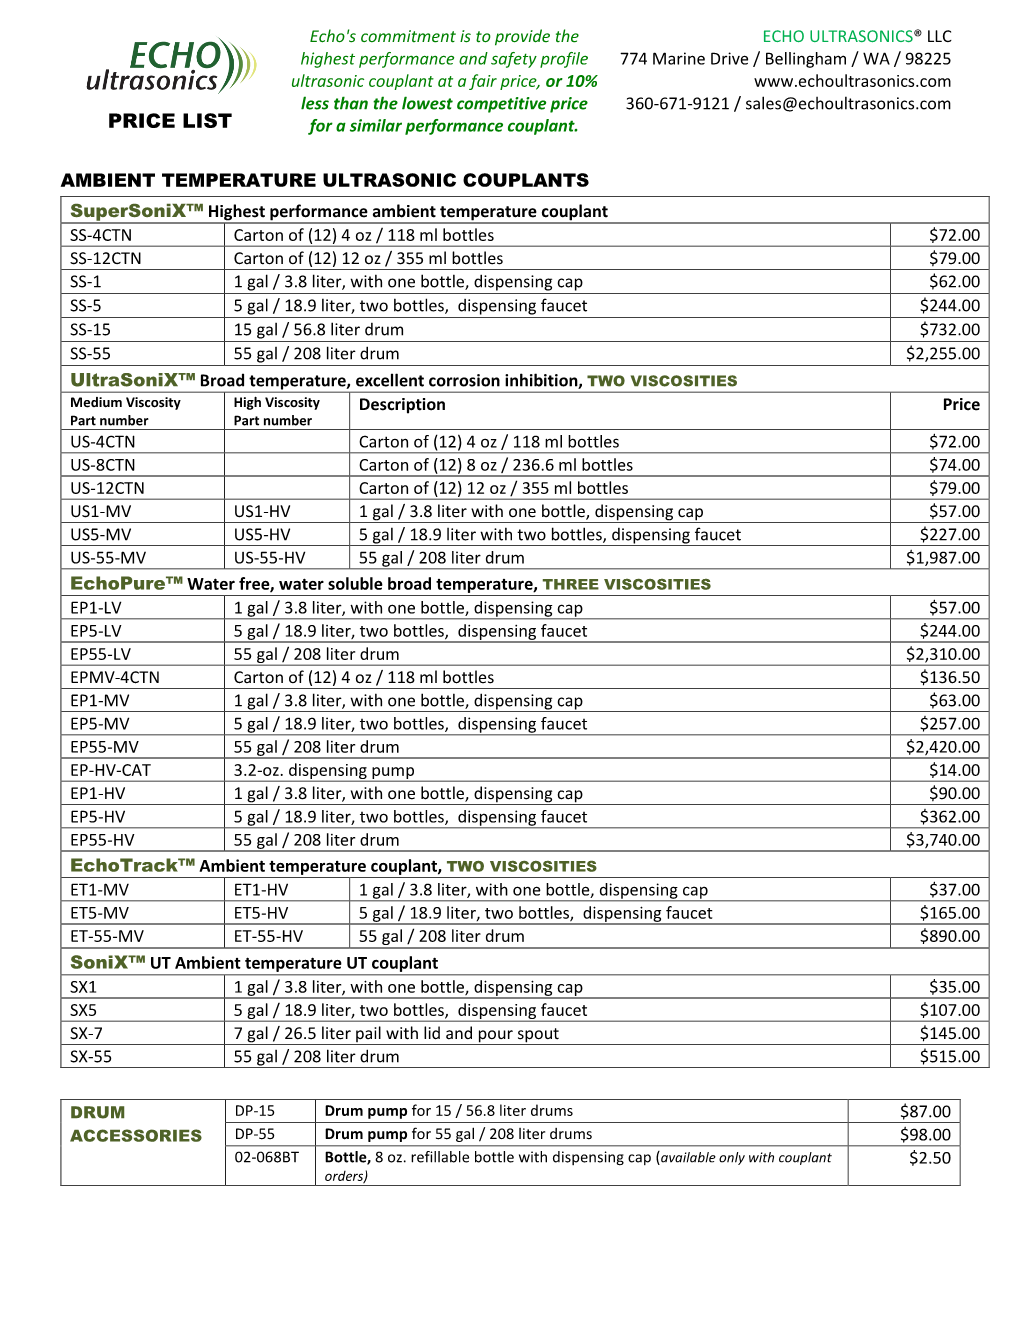 PRICE LIST for a Similar Performance Couplant